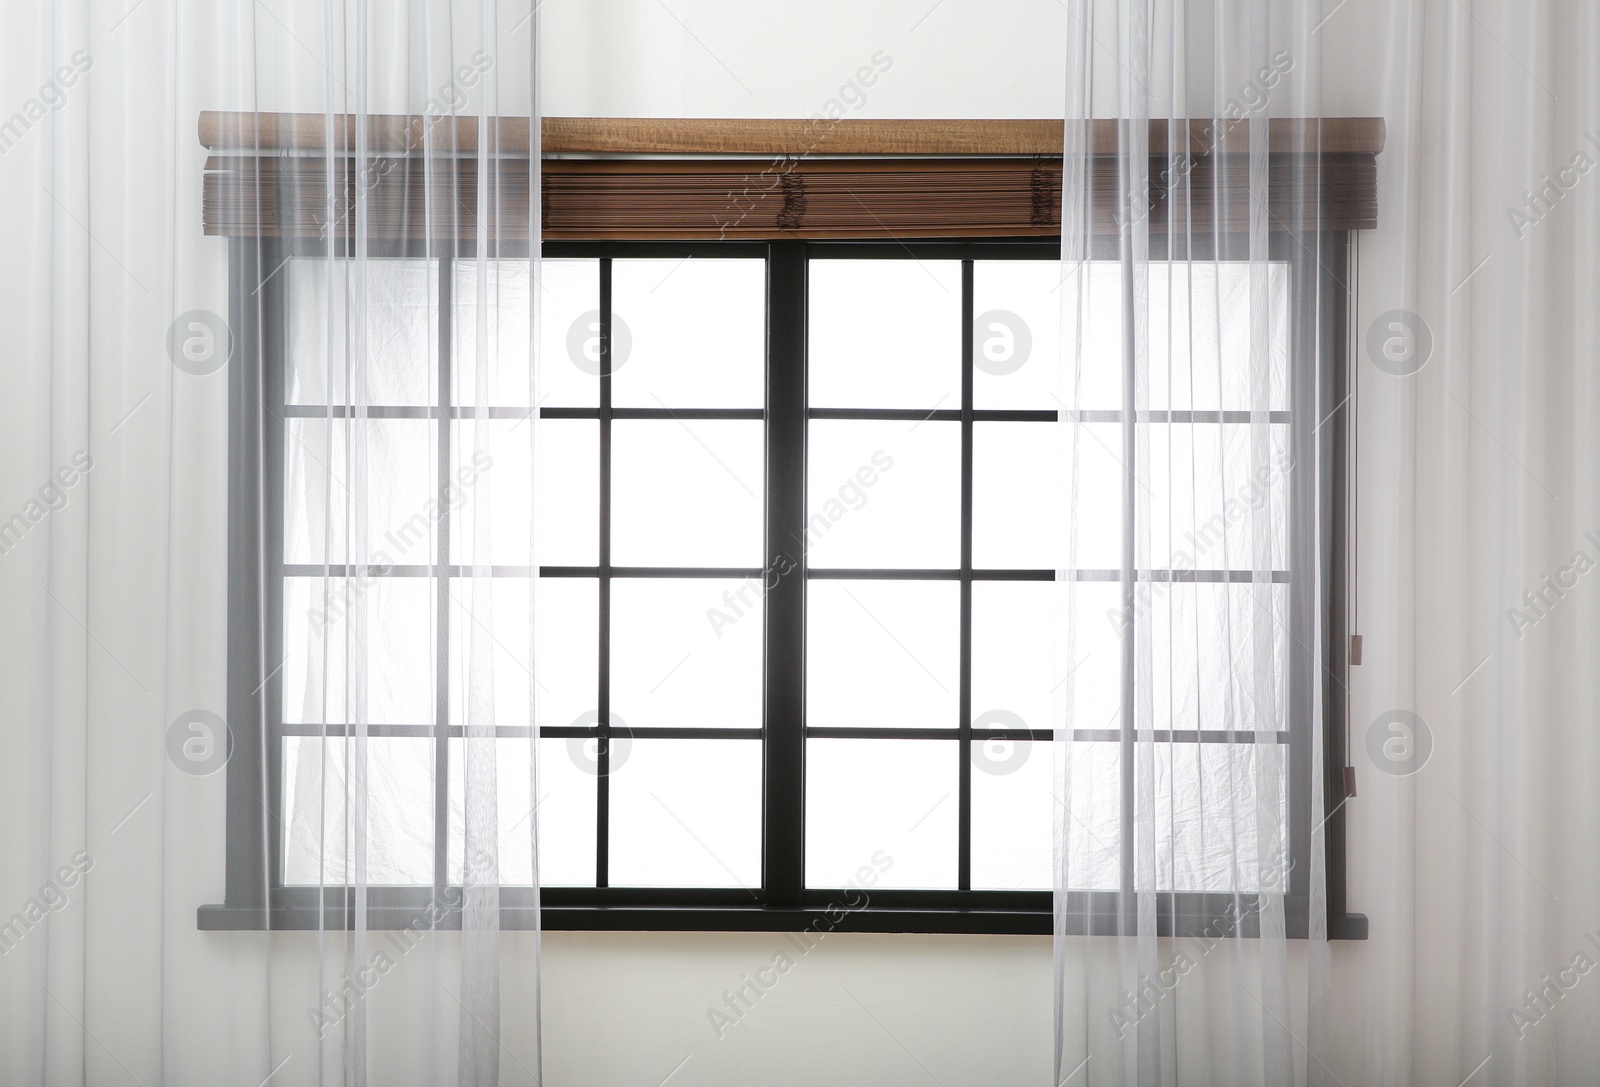 Photo of Window with beautiful curtains and open blinds in room